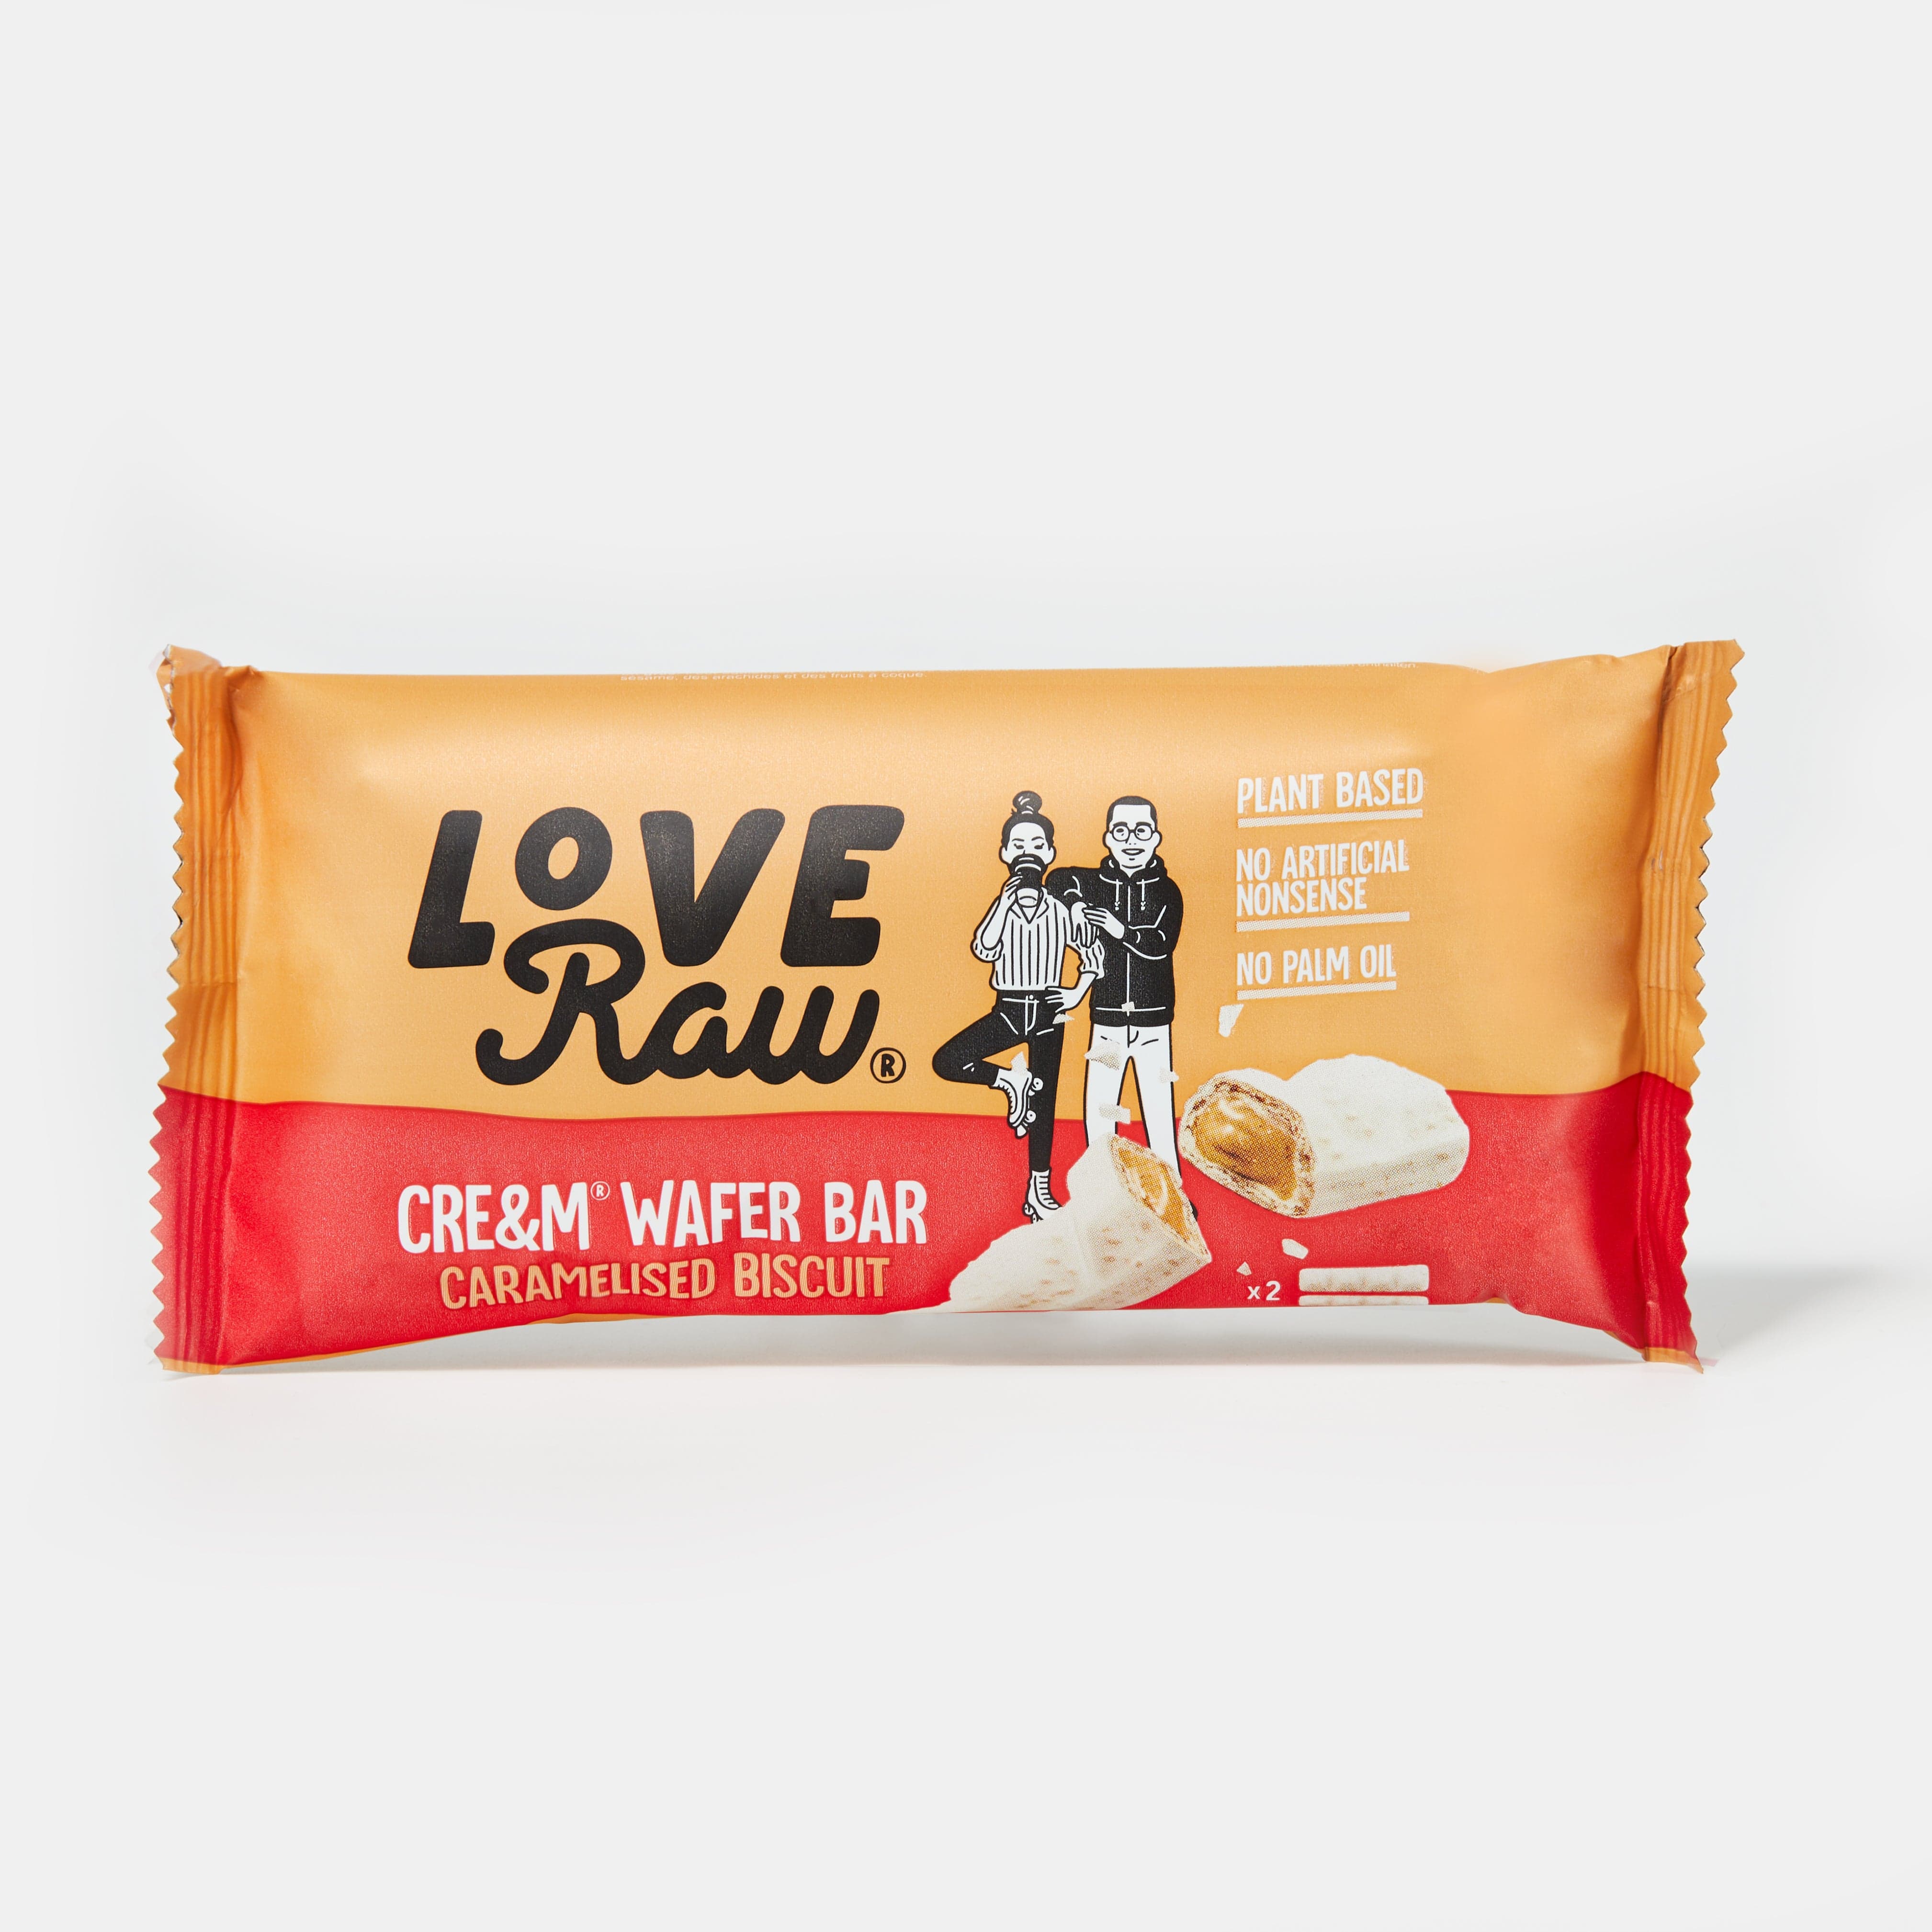 Caramelised Biscuit Cre&m® Wafer Bars